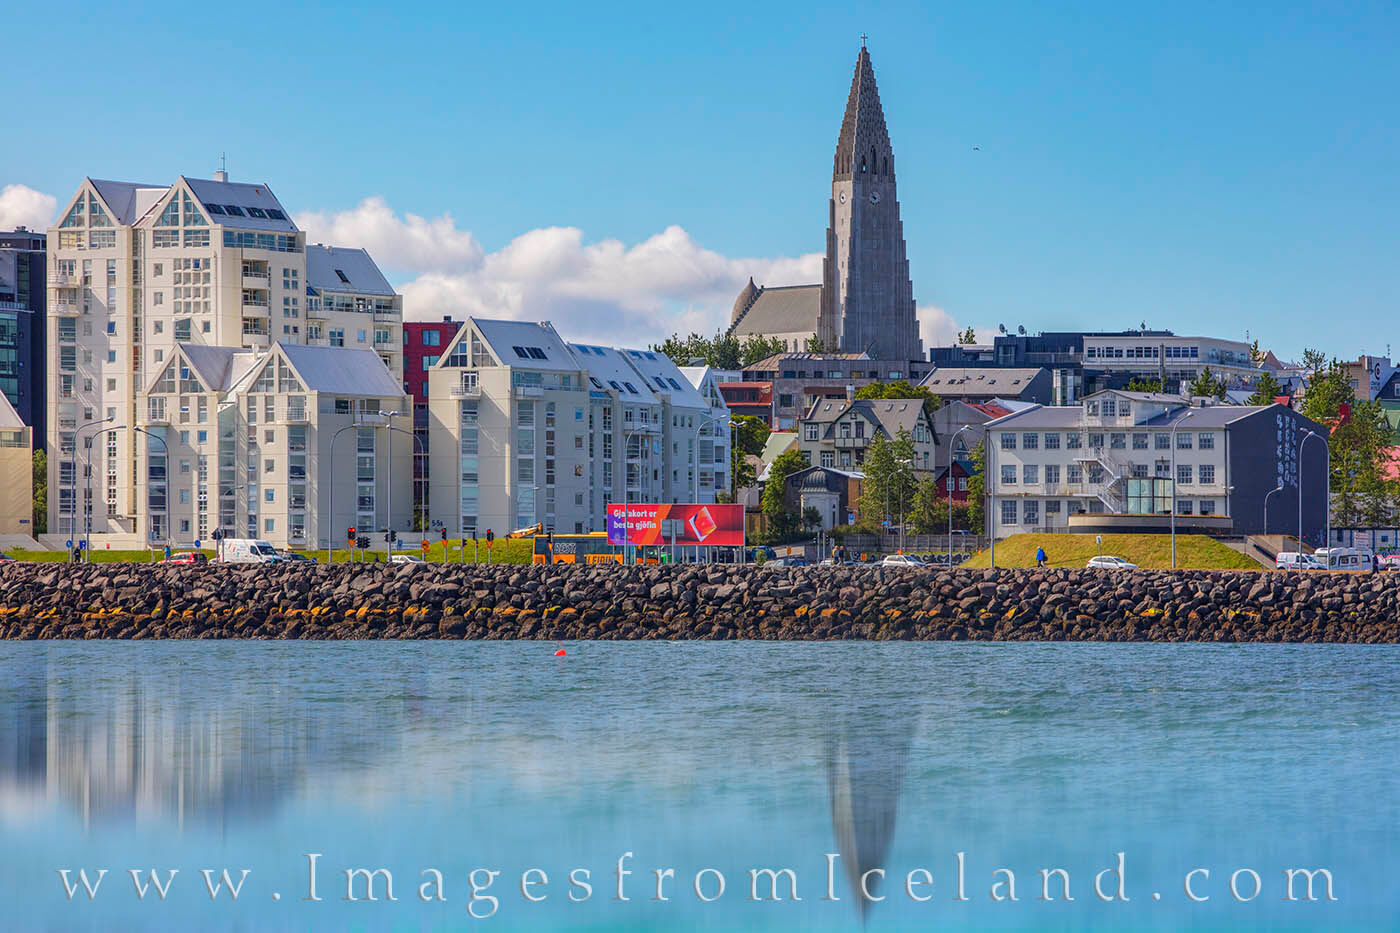 From the shores of Tjörnin, or “the lake,” Hallgrímskirkja’s lofty archicture can be seen rising into the beautiful...